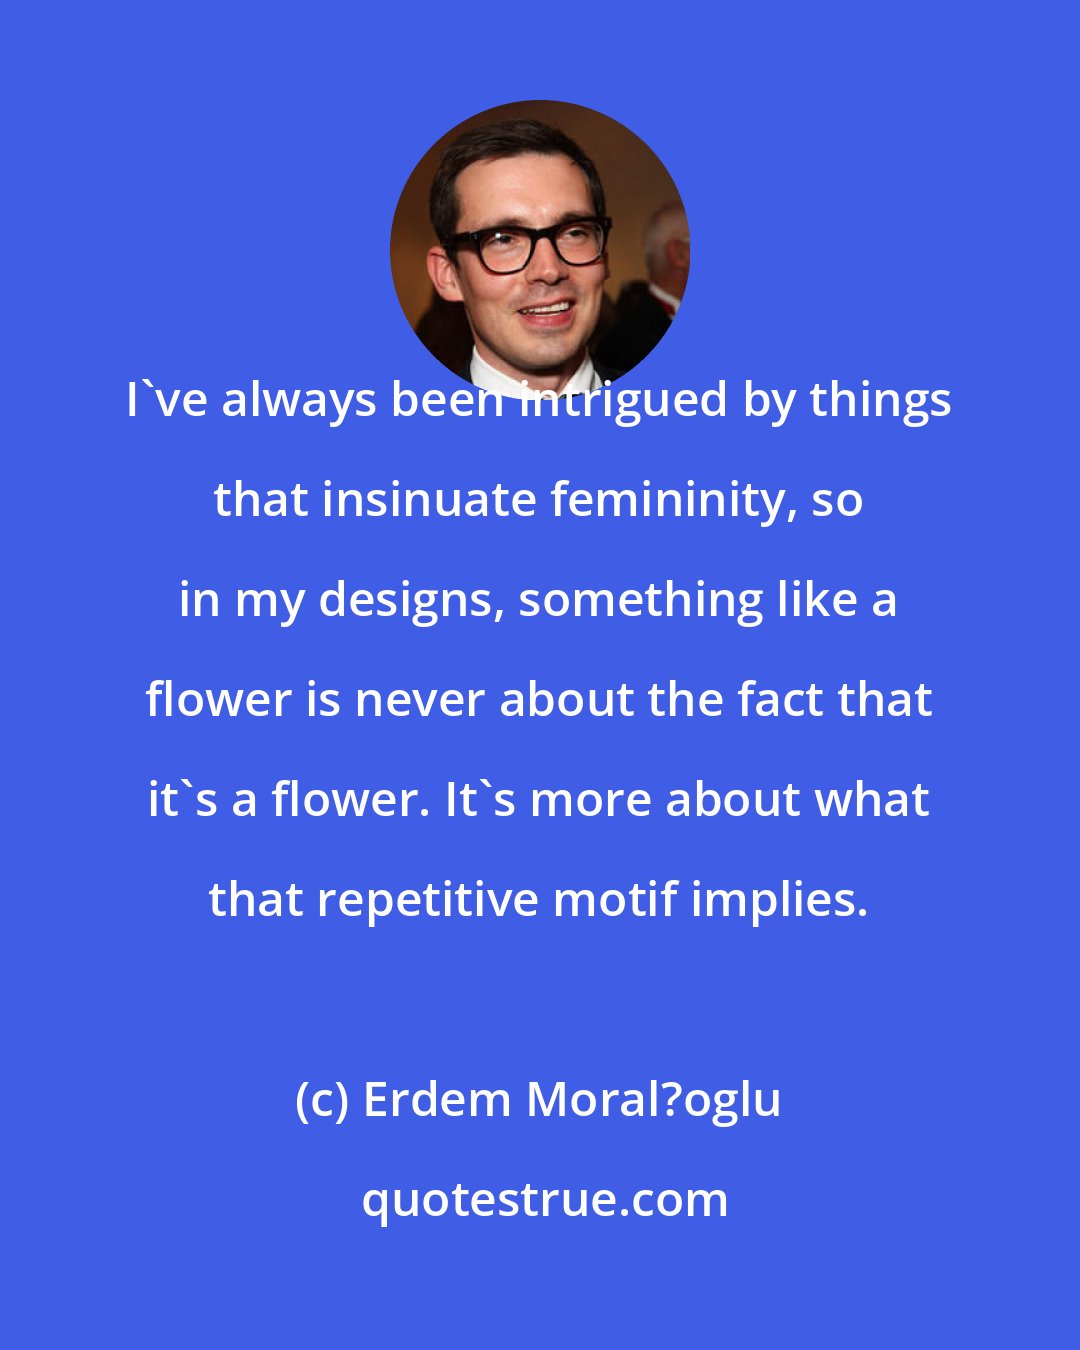 Erdem Moral?oglu: I've always been intrigued by things that insinuate femininity, so in my designs, something like a flower is never about the fact that it's a flower. It's more about what that repetitive motif implies.